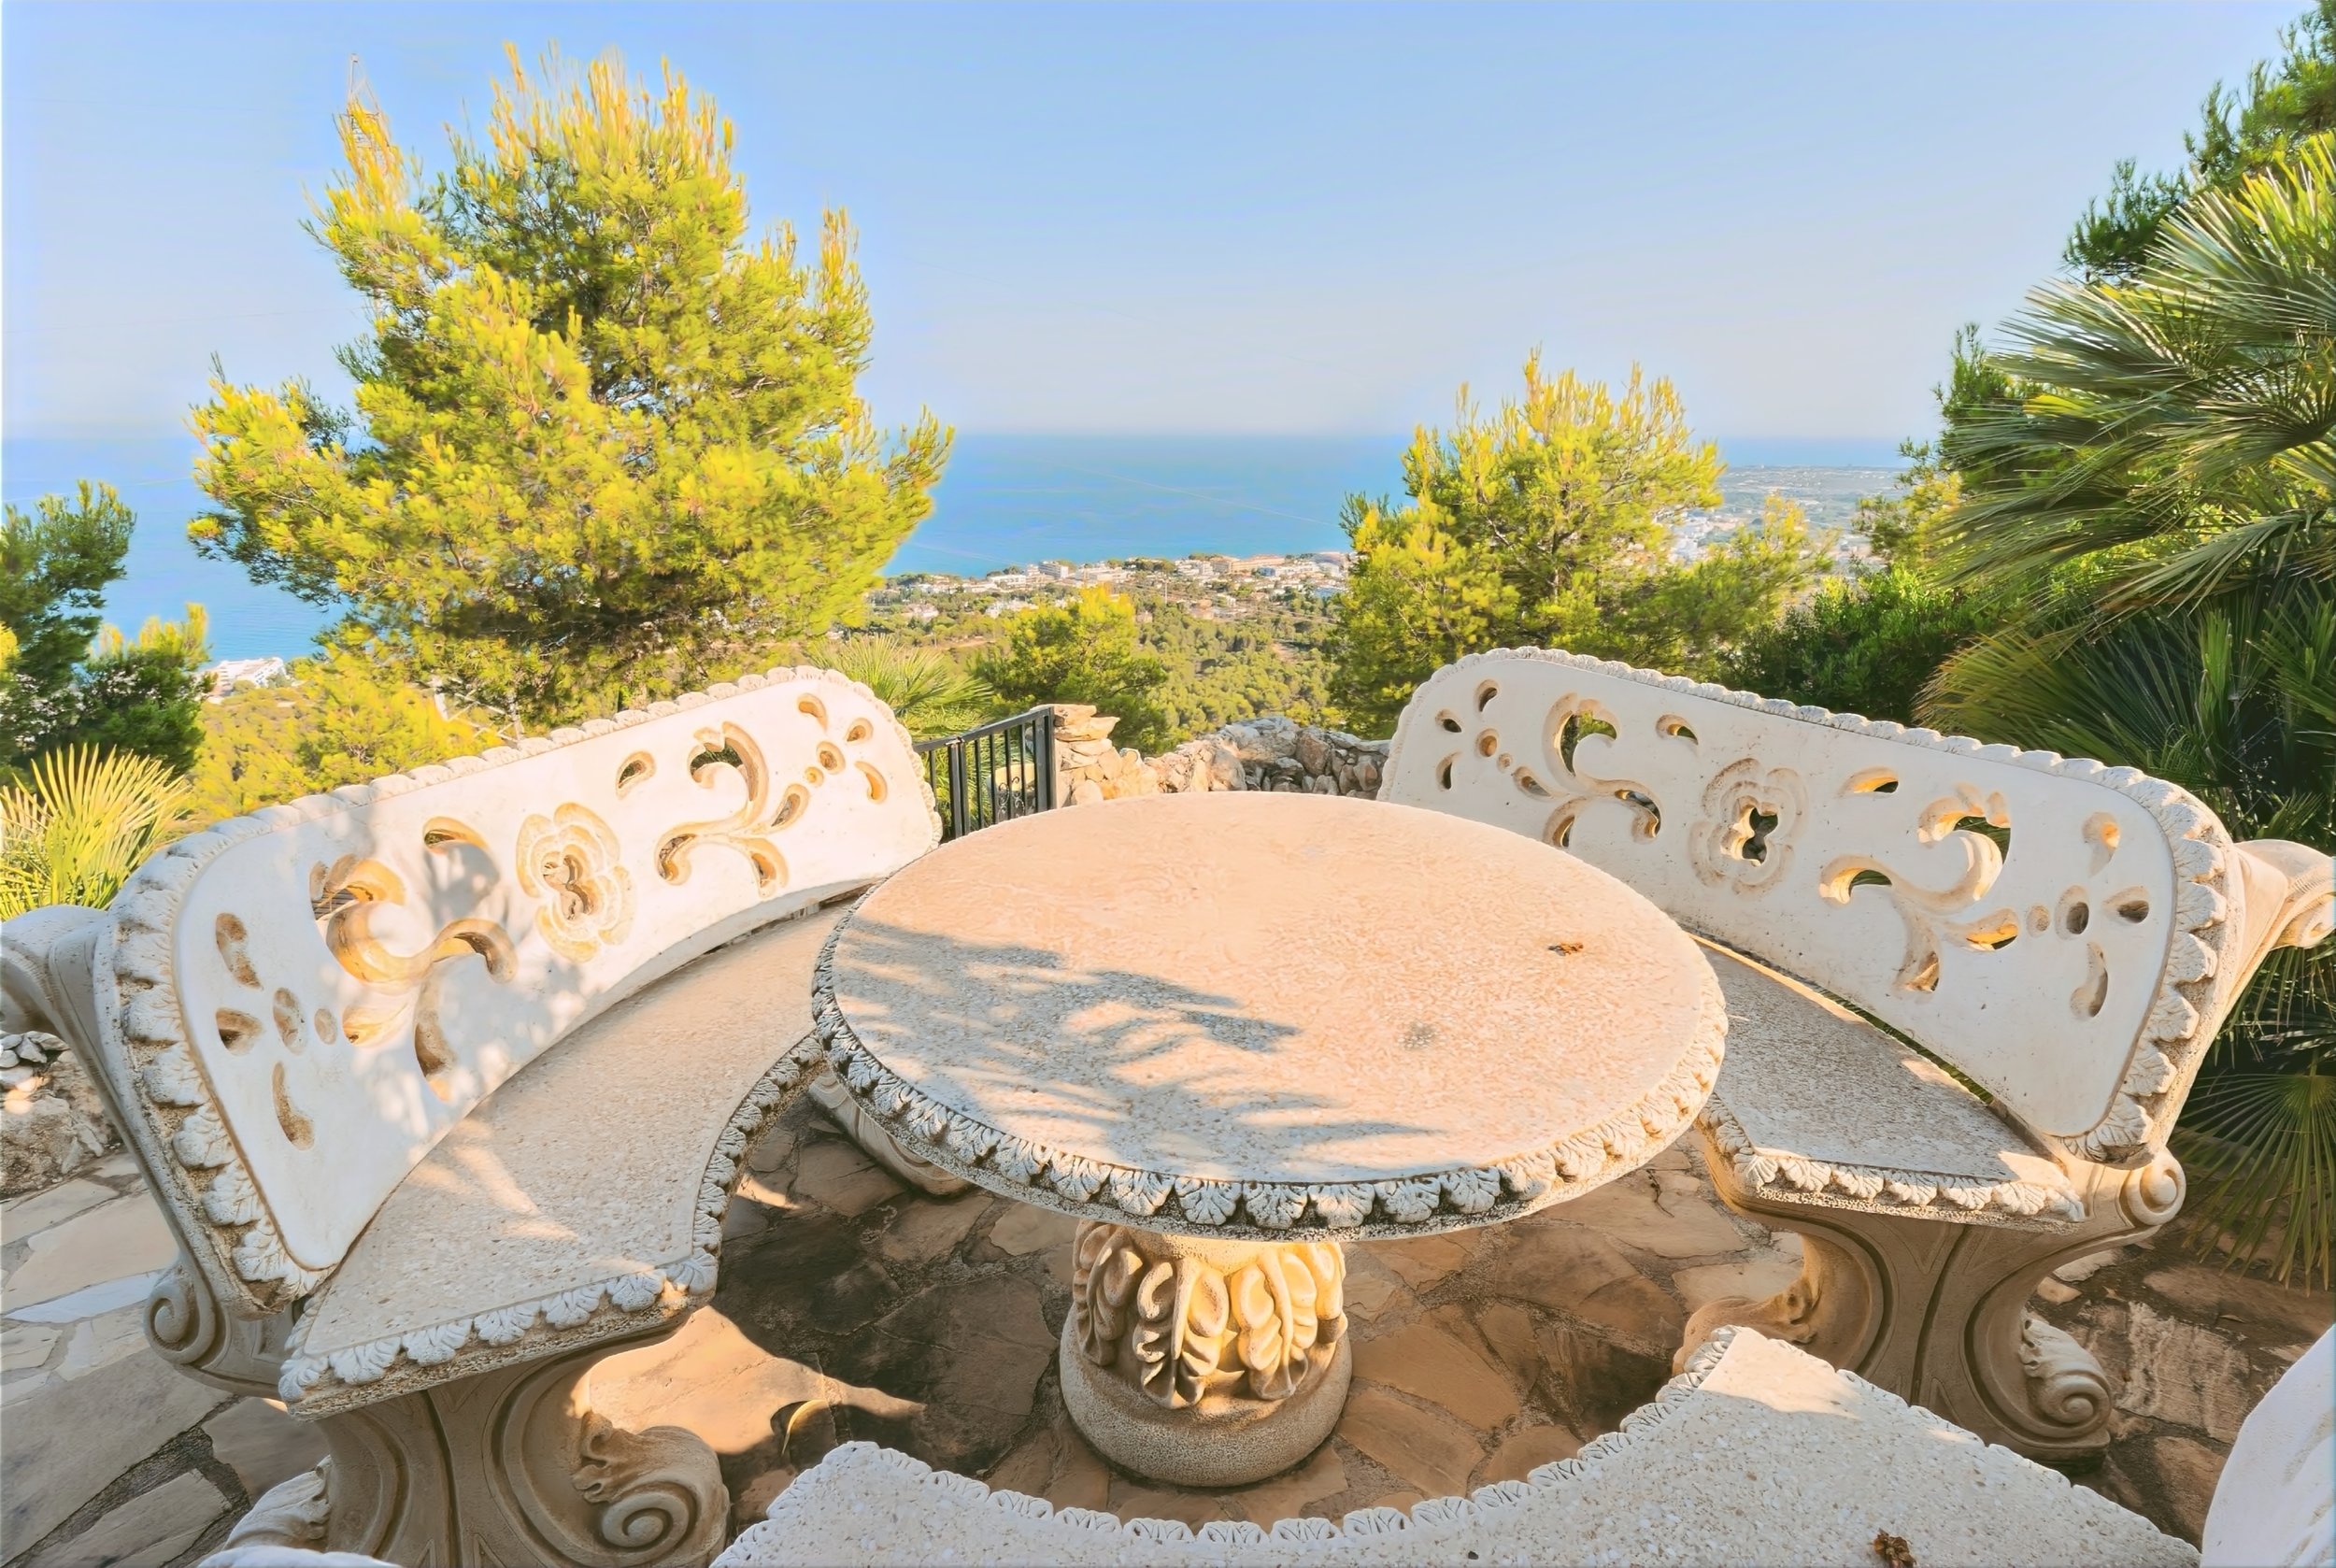 Breizas Stone Terrace:  Scenic Ocean View with table and Chairs